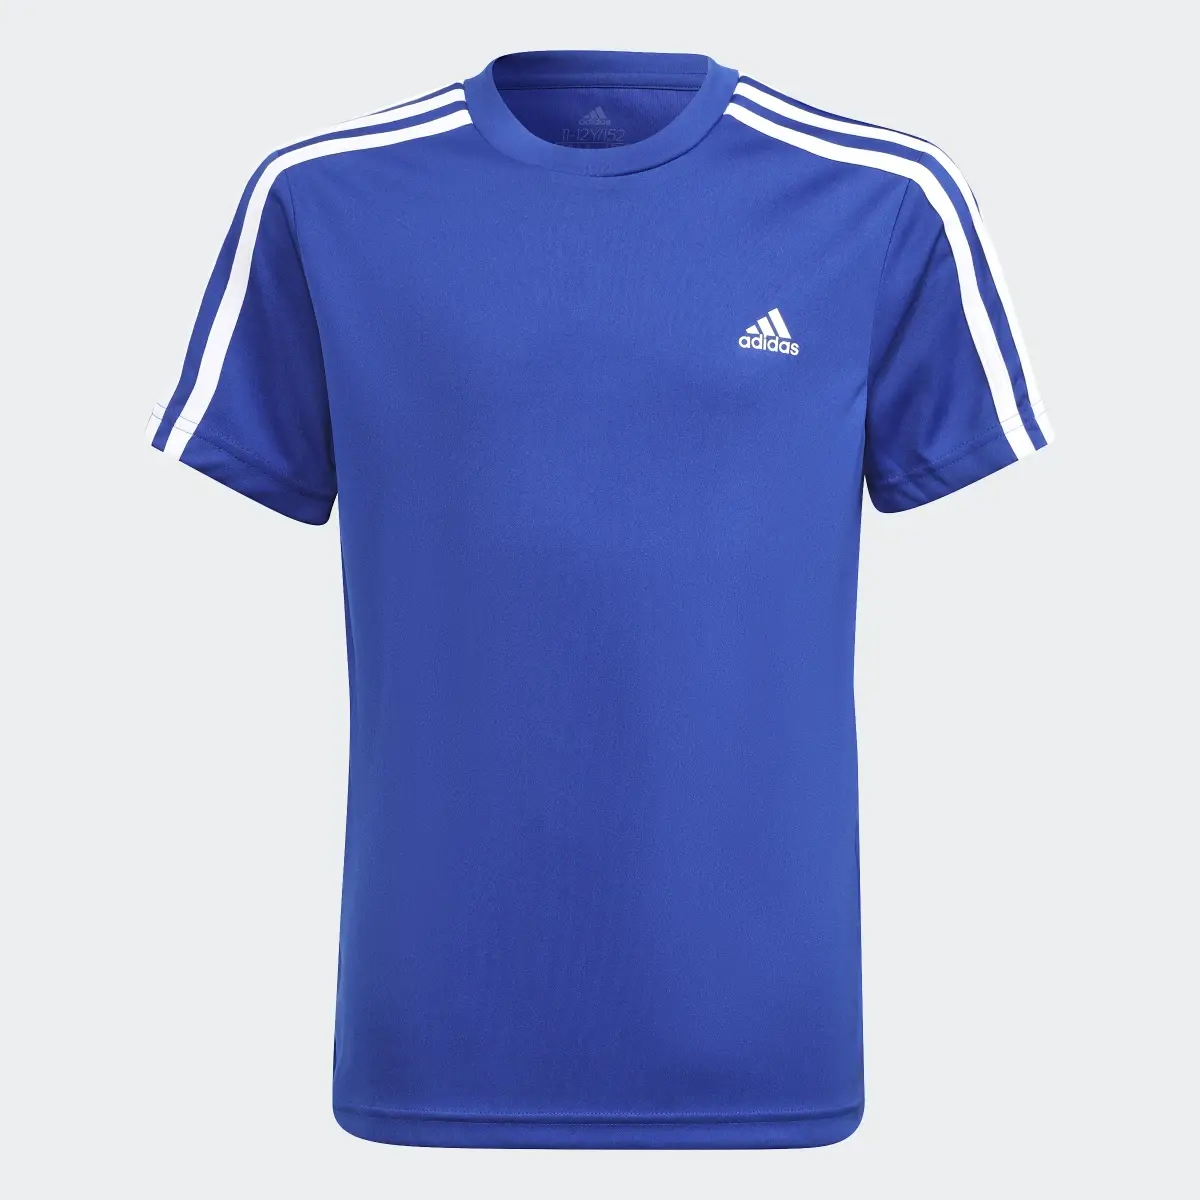 Adidas DESIGNED TO MOVE TEE AND SHORTS SET. 2